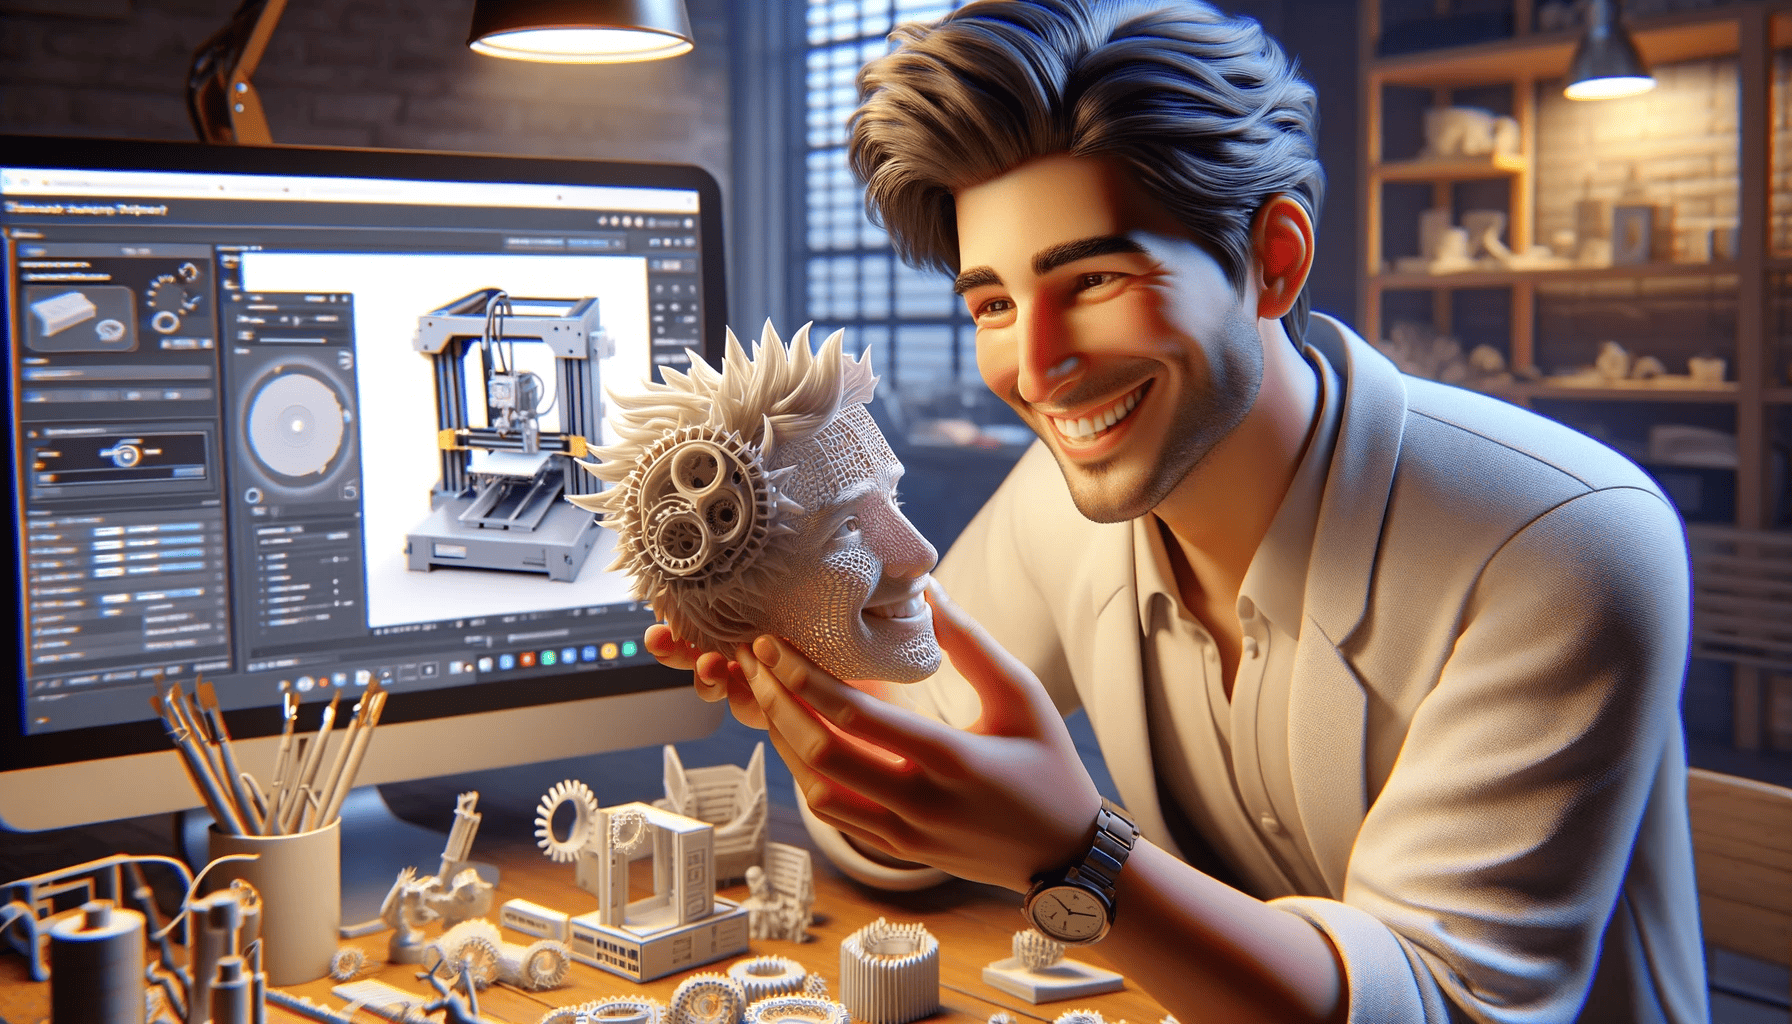 A happy person examining a detailed 3D printed model that they created after completing our beginner 3D printing tutorials.